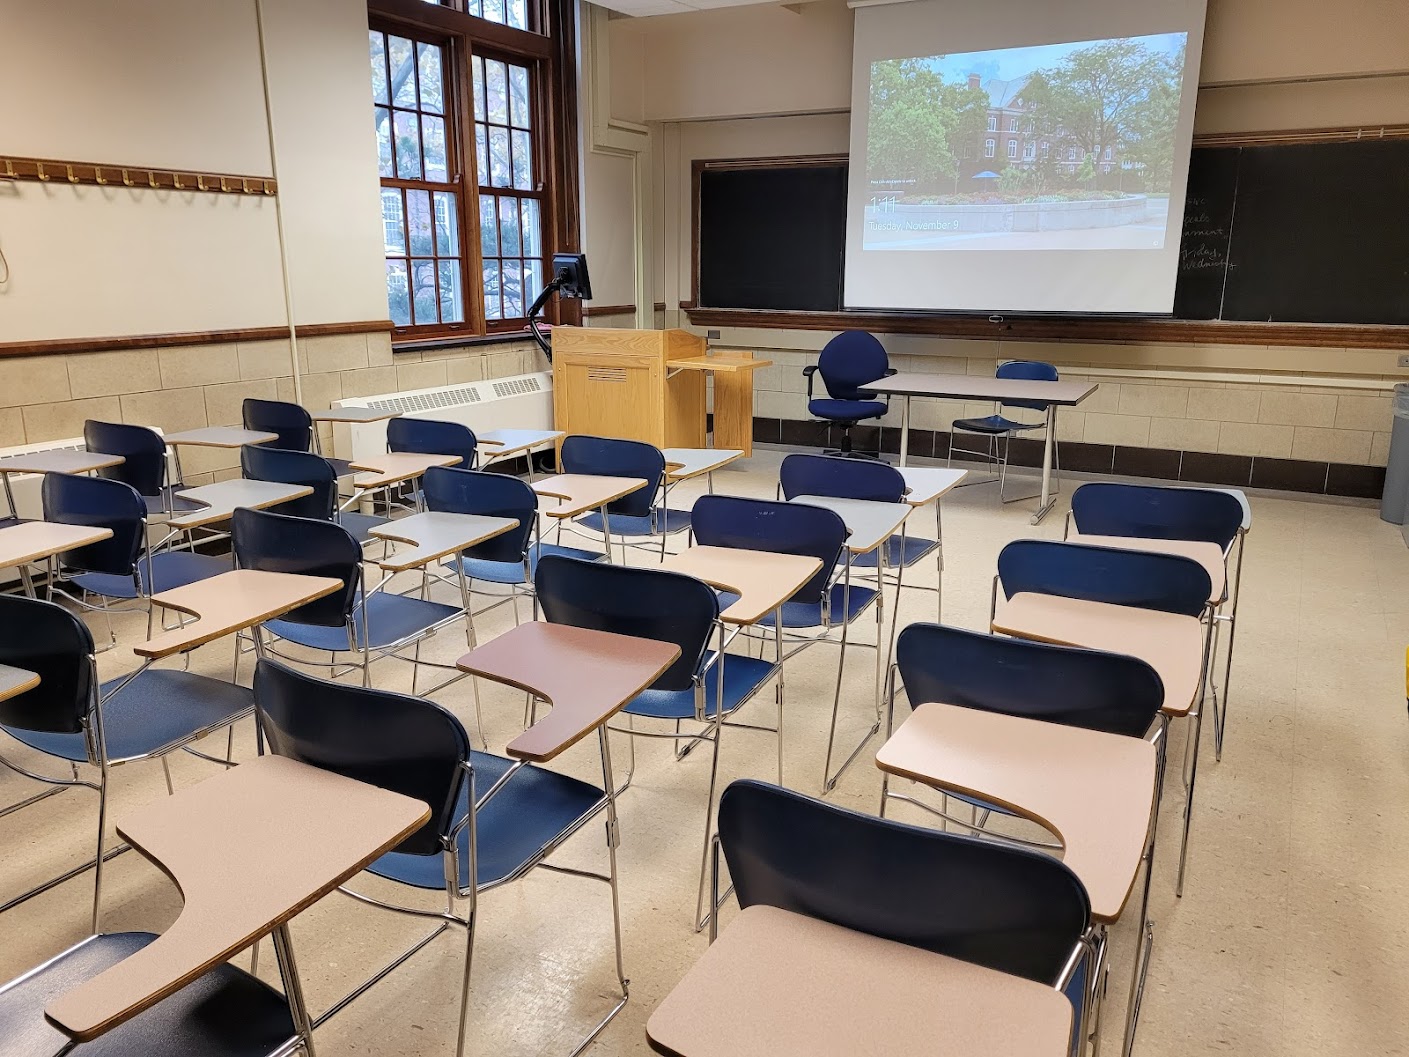 A view of the classroom with movable tablet arm chairs, chalkboard, and instructor table in front.